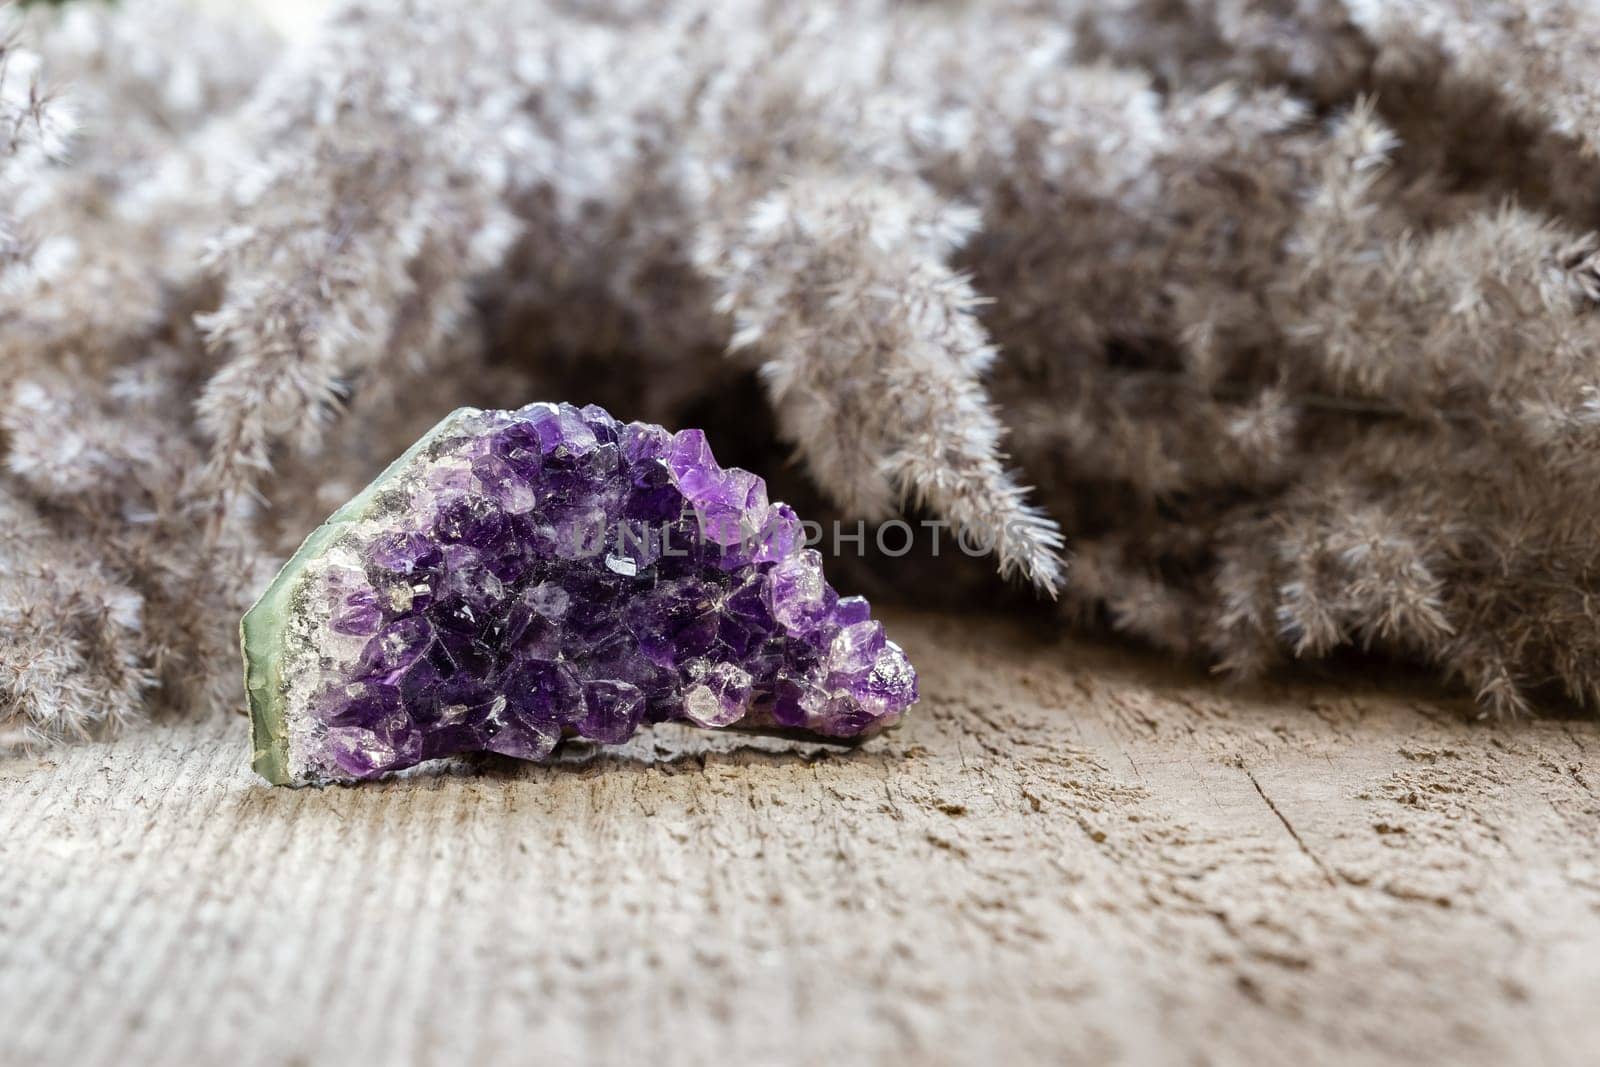 Amethyst crystal druzy a purple variety of quartz over wooden background. Healing crystal concept, amethyst is good for relieve anxiety and stress. Natural mineral stone collection